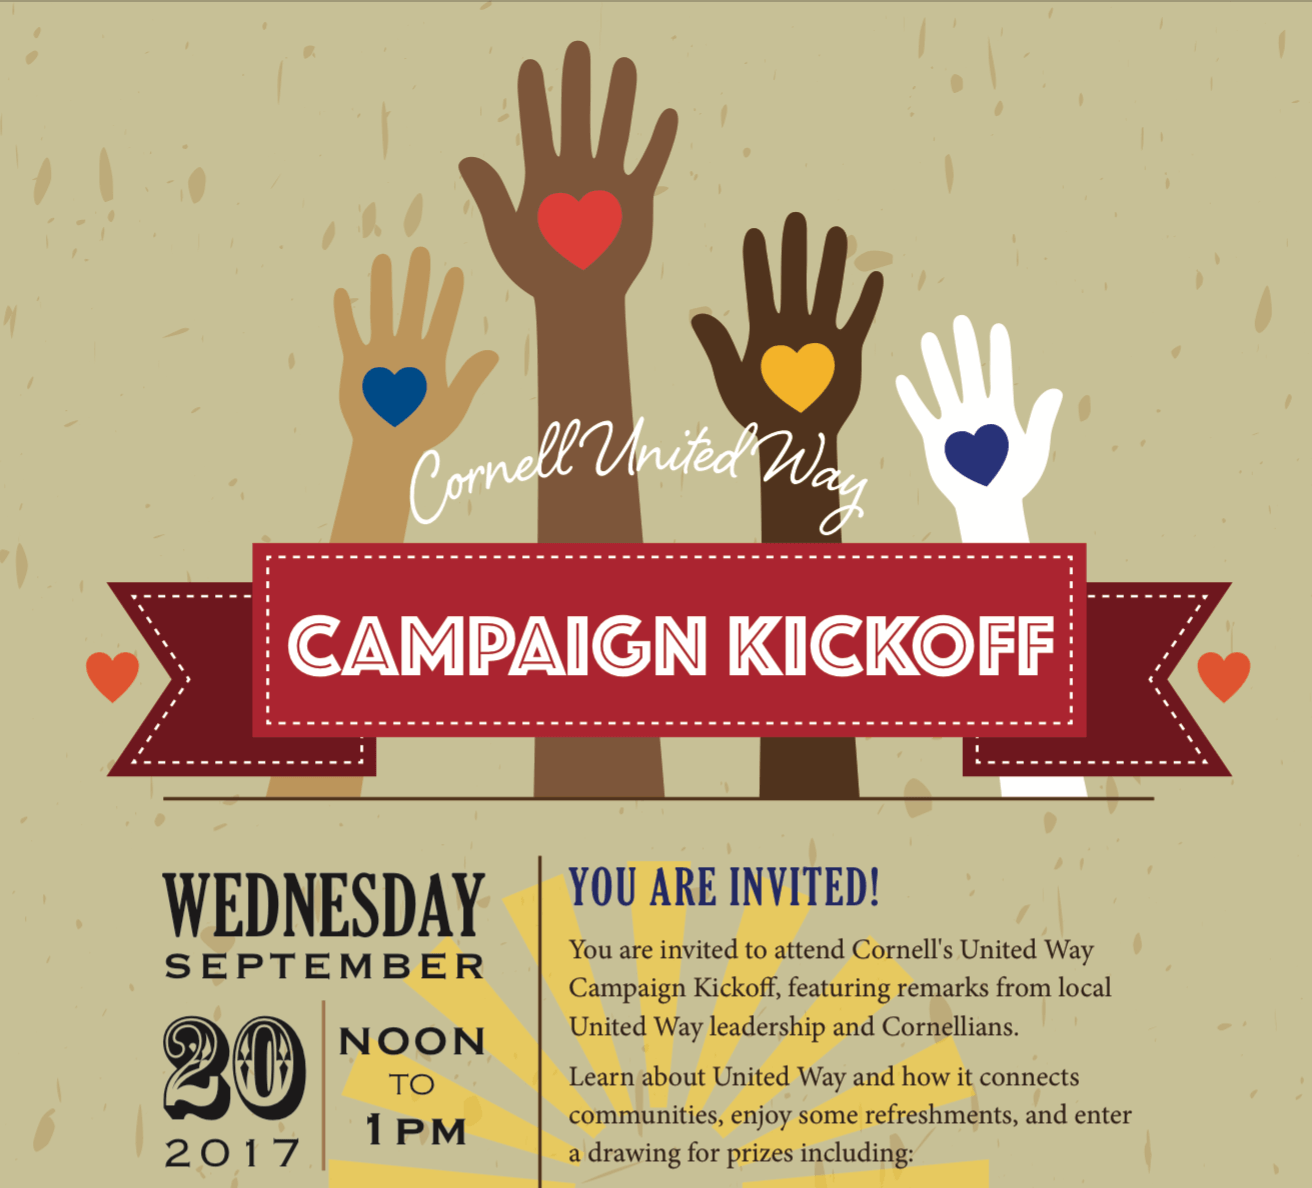 What’s new… Campaign Kickoff